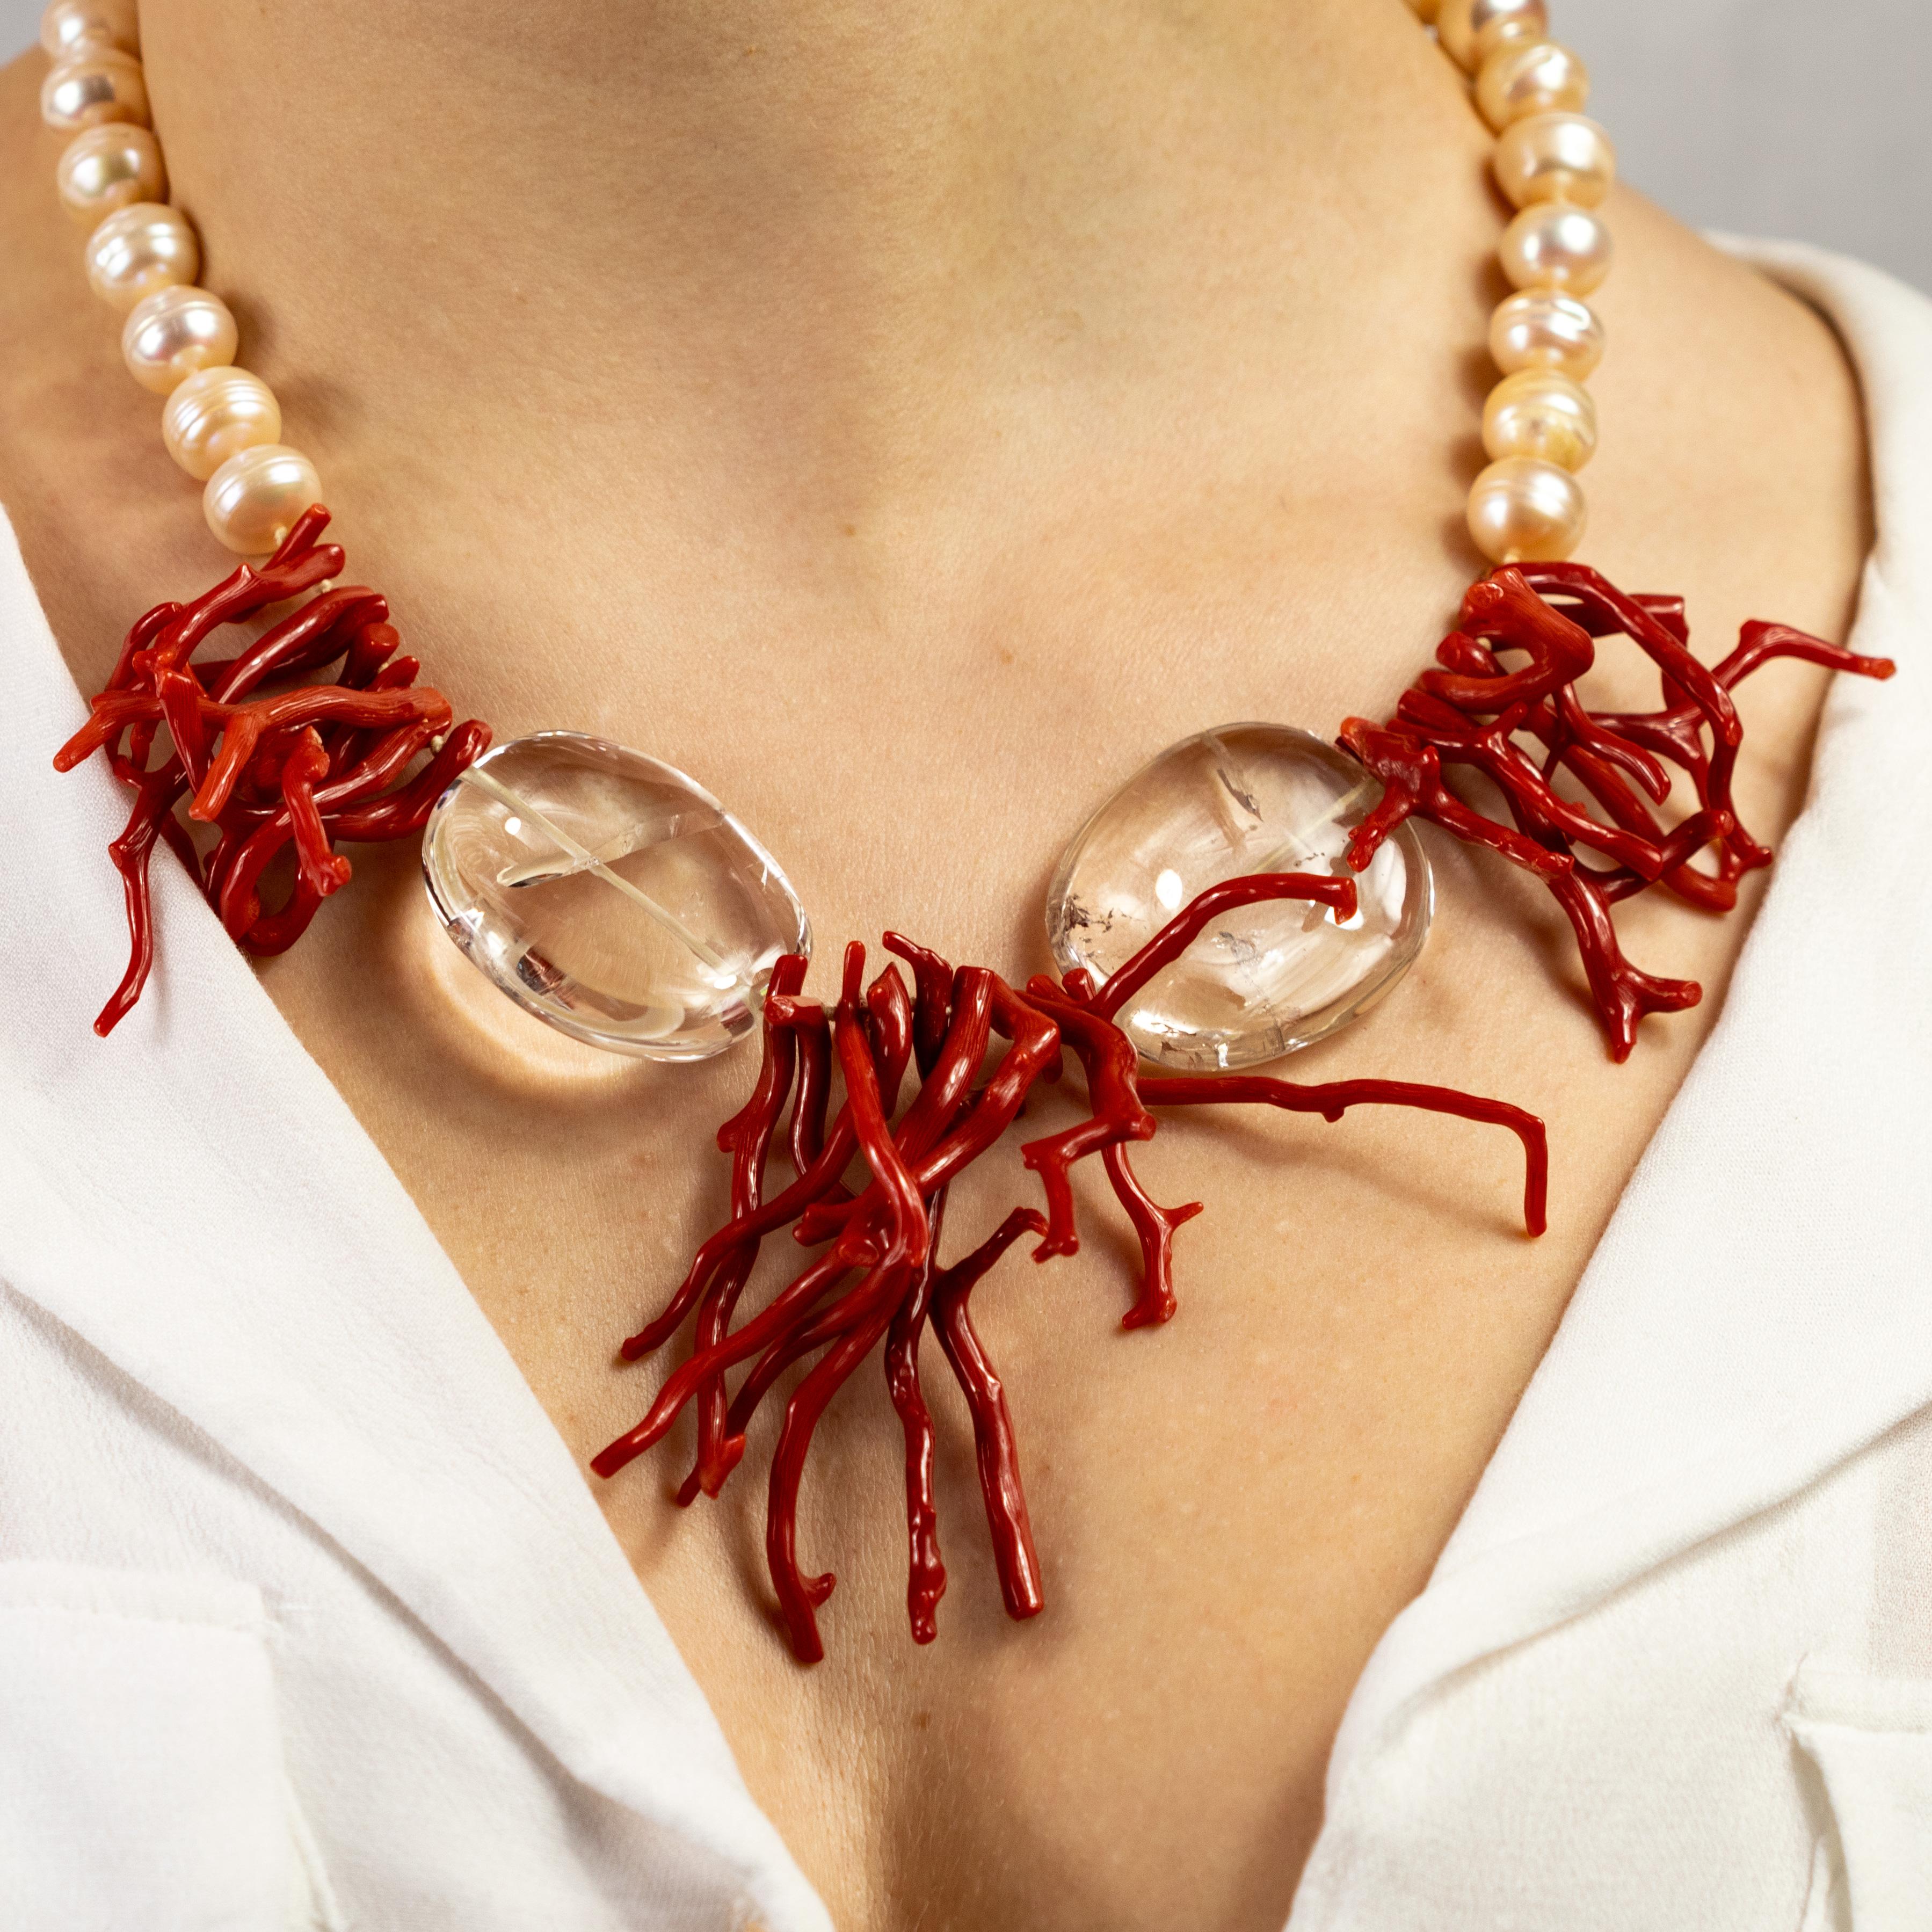 Immerse yourself in the beauty of this uniquely designed necklace with natural red coral, freshwater pearls and crystal rocks.
 
This design is inspired by the red corals of the Australian Great Barrier Reef. A subtle and harmonious jewel. The warm